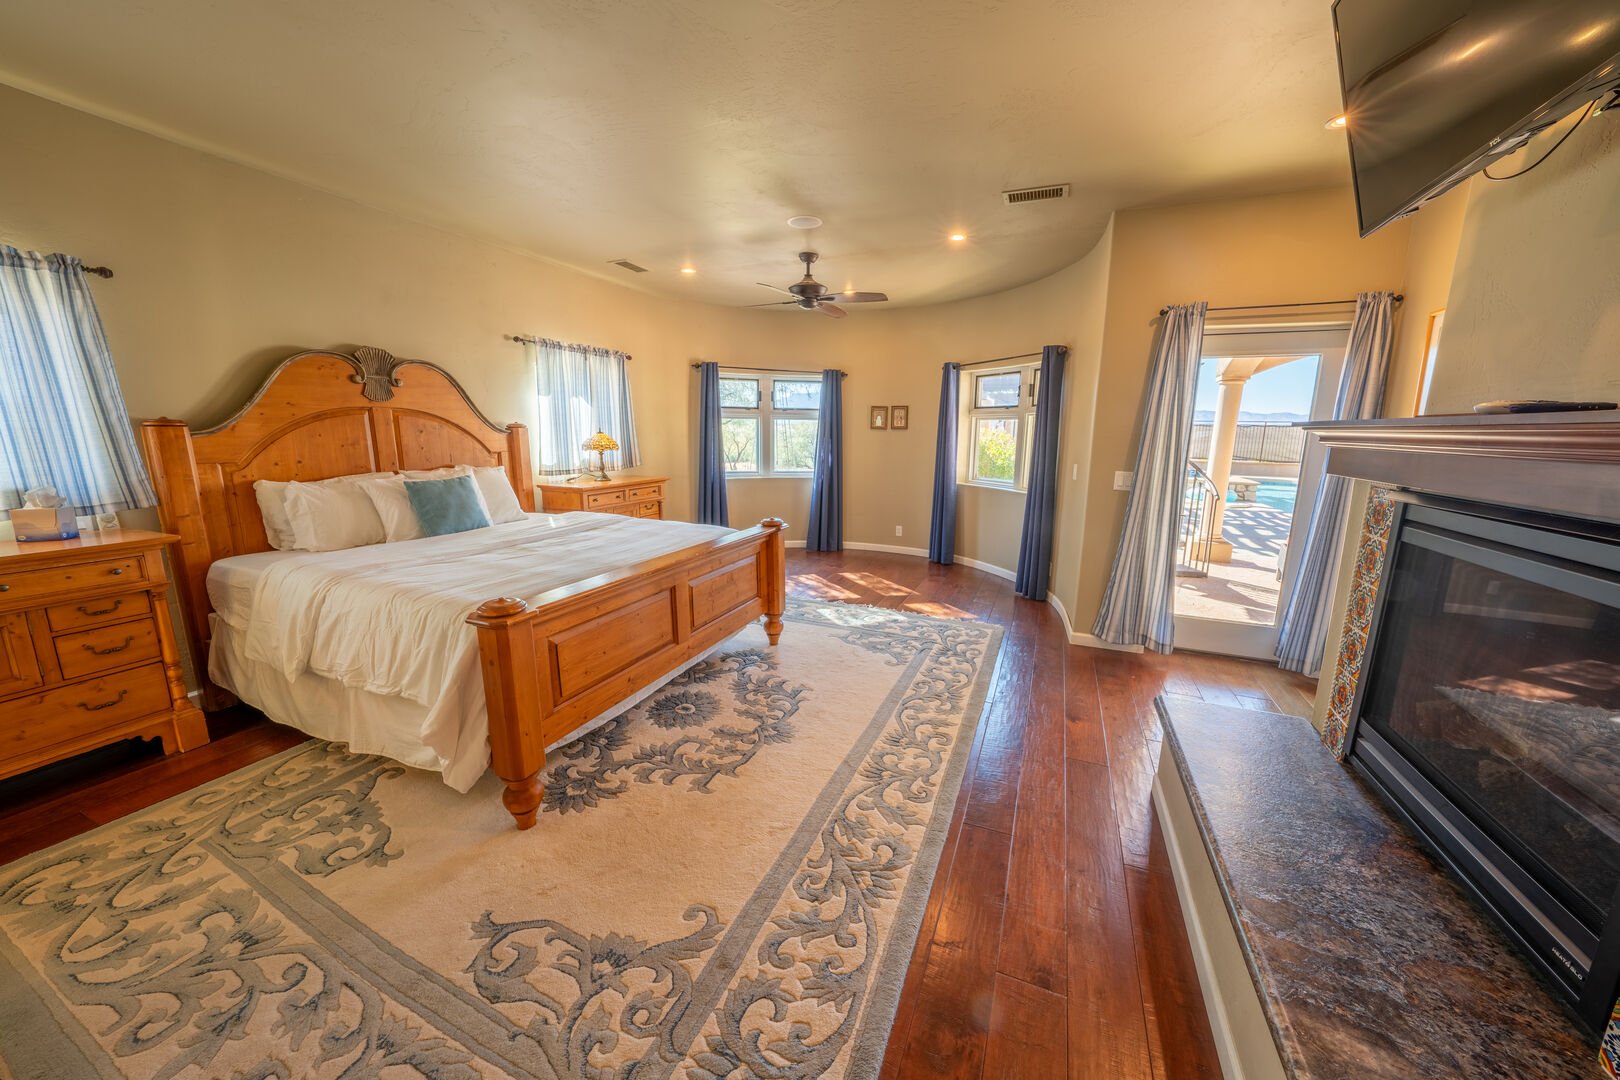 Master Bedroom With Fireplace, TV, And Access To Pool Area